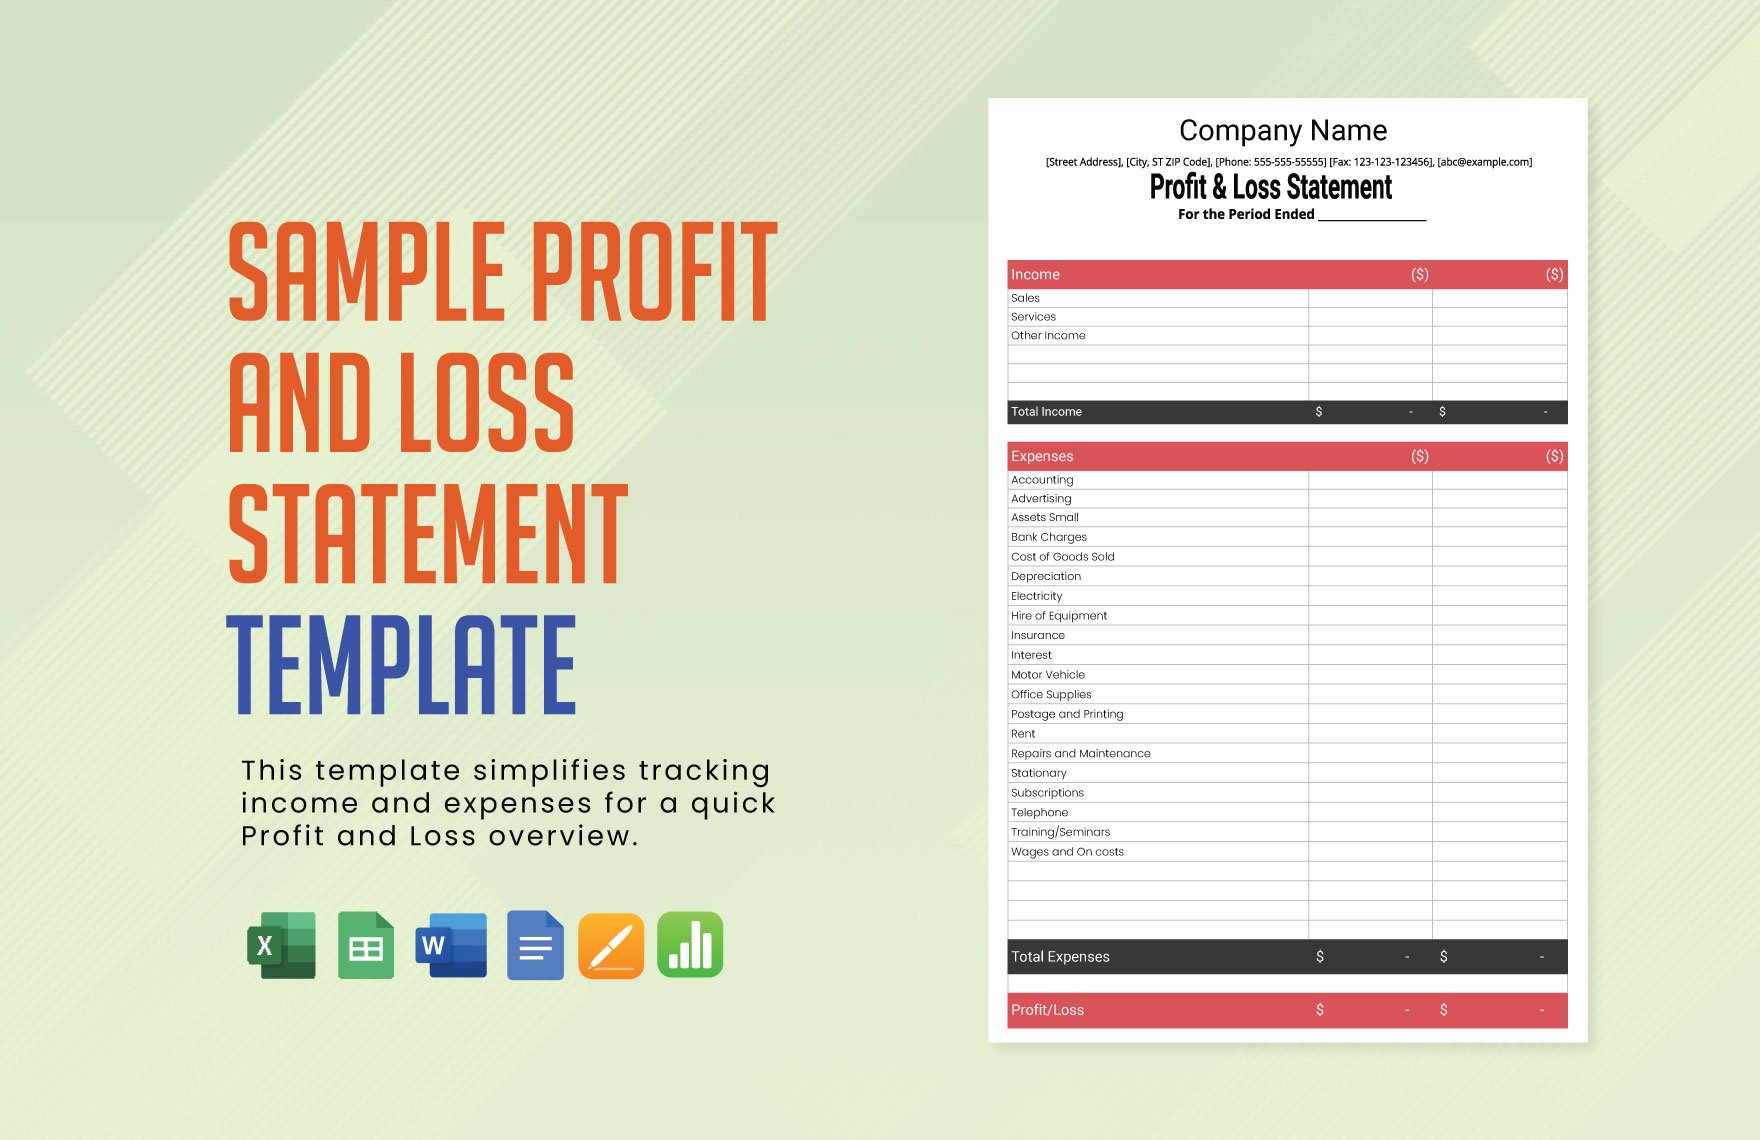 Sample Profit and Loss Statement Template